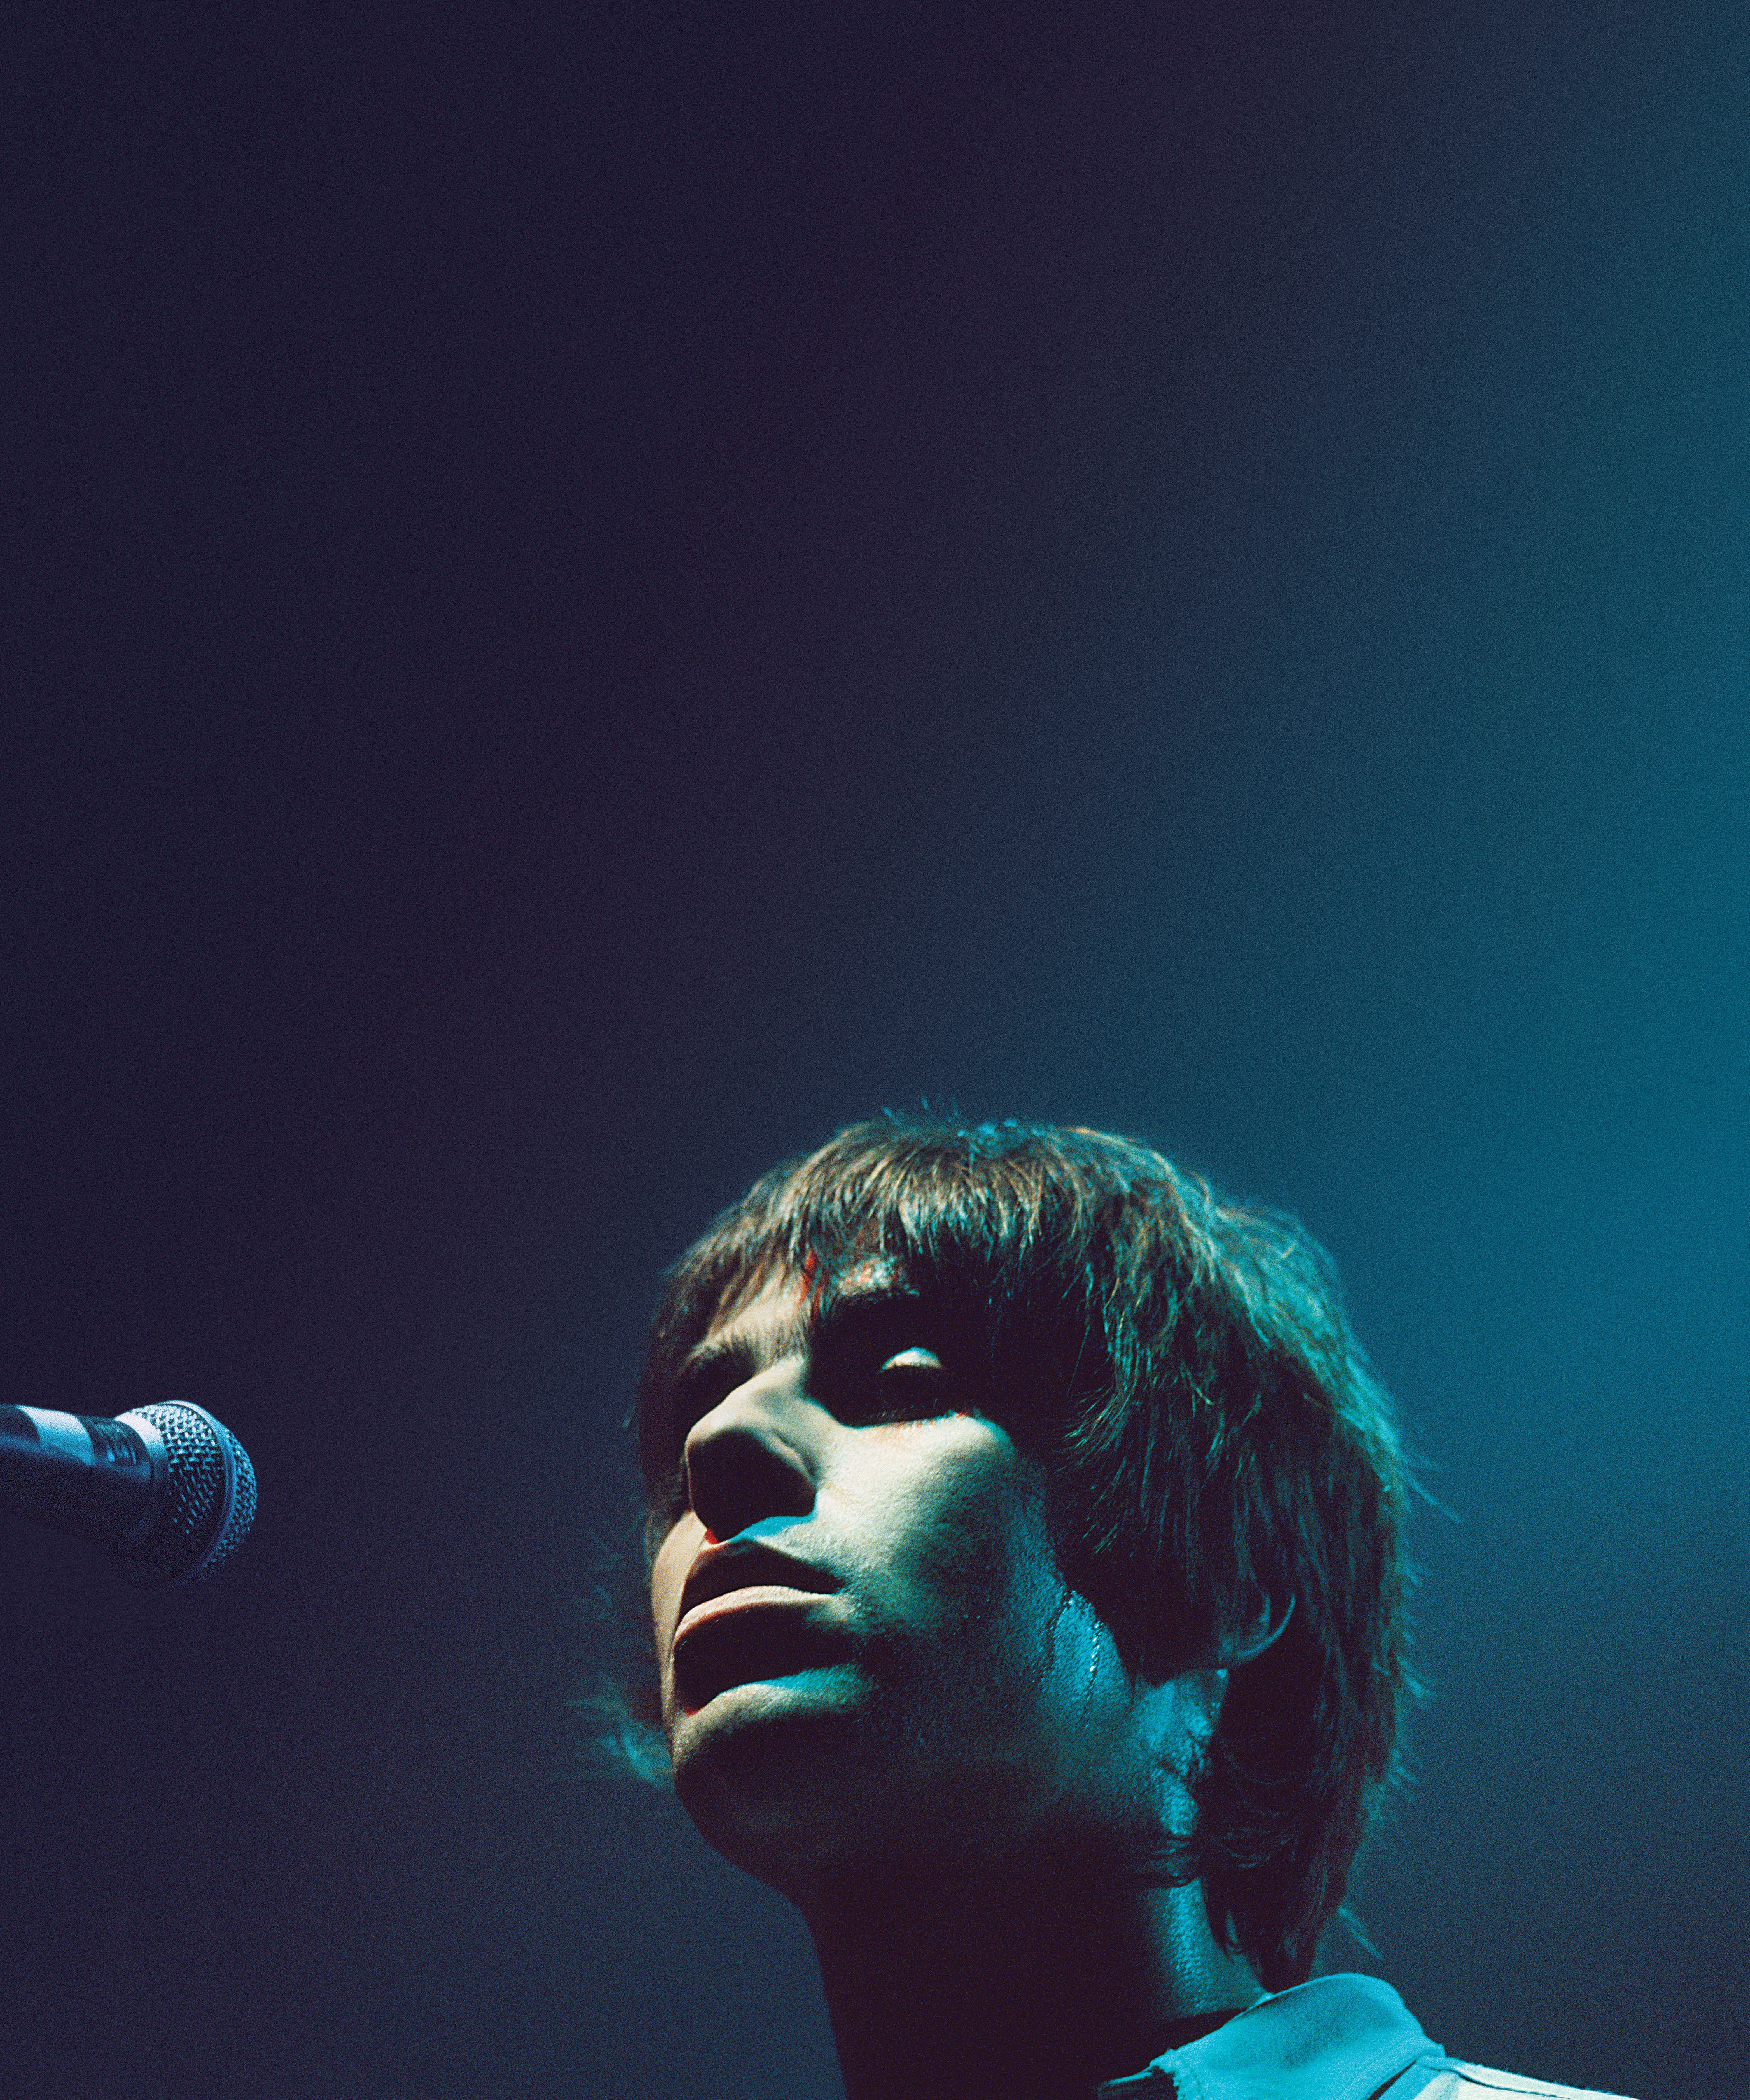 Liam Gallagher - Definitely Maybe 30 Years in Limerick City promo photo for MCD presale offer code